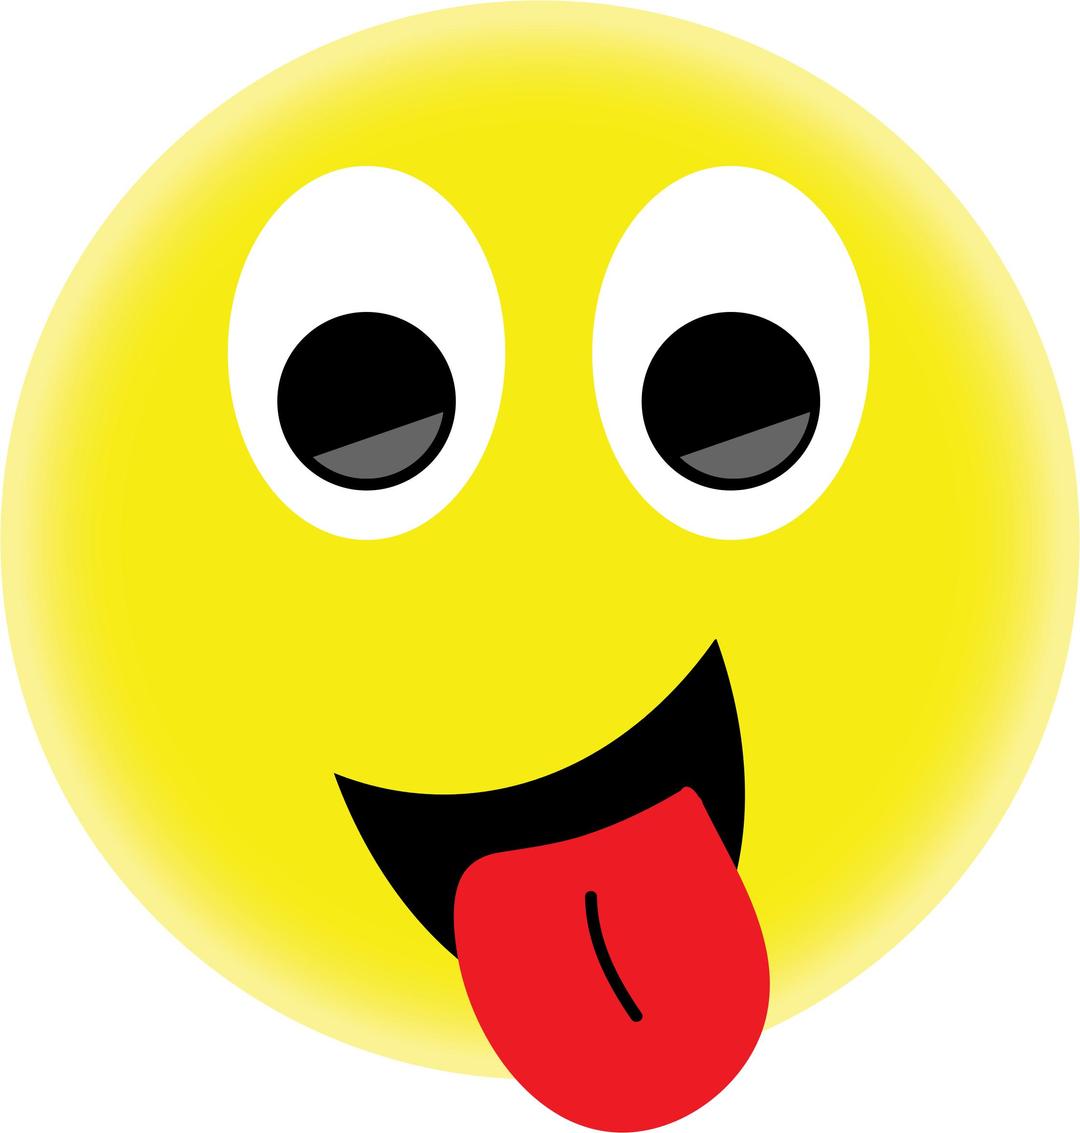 Smiley Face With Tongue Out png transparent